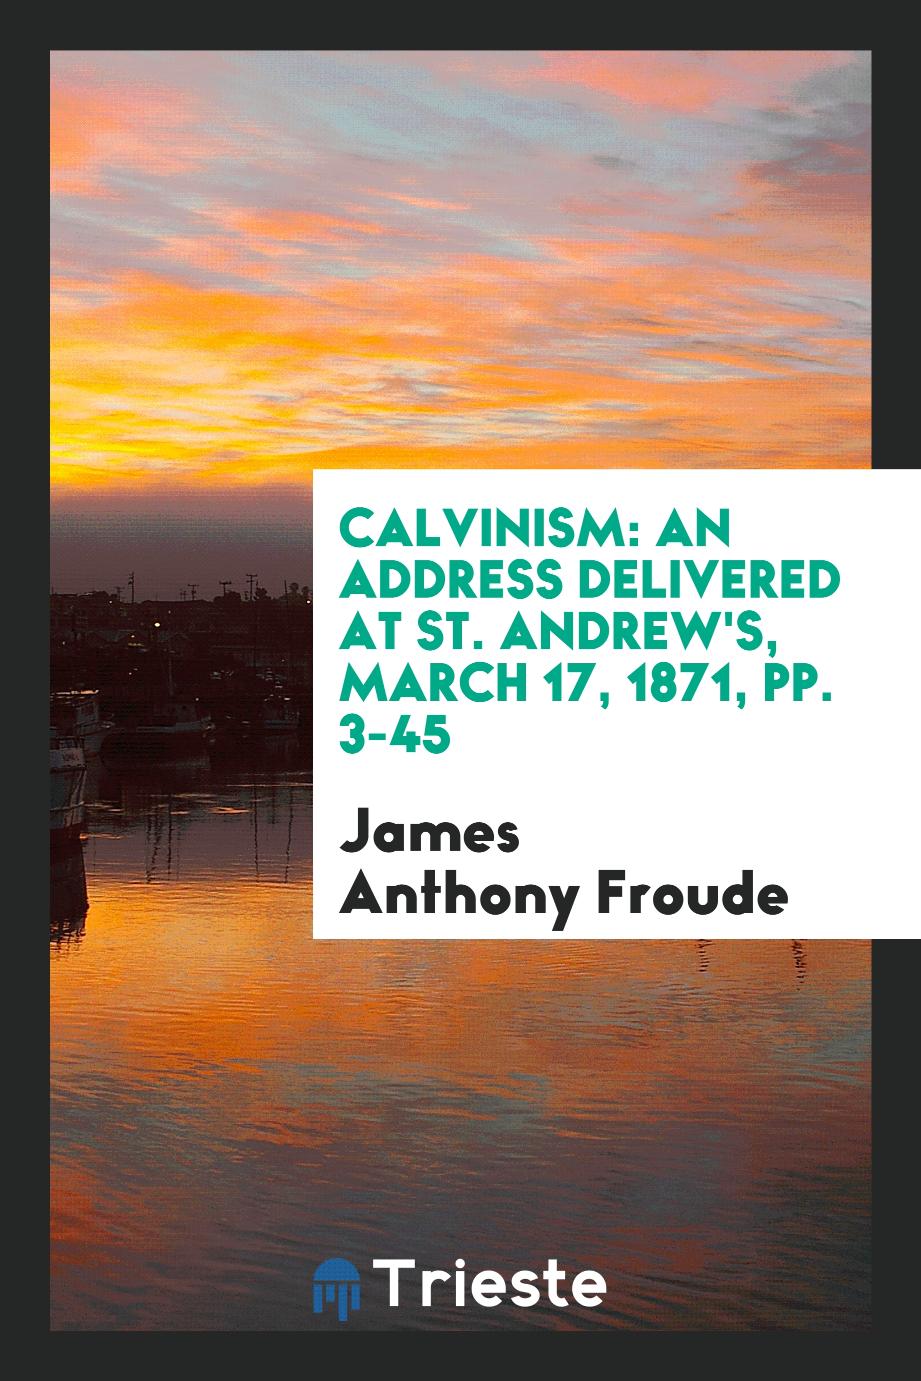 Calvinism: An Address Delivered at St. Andrew's, March 17, 1871, pp. 3-45